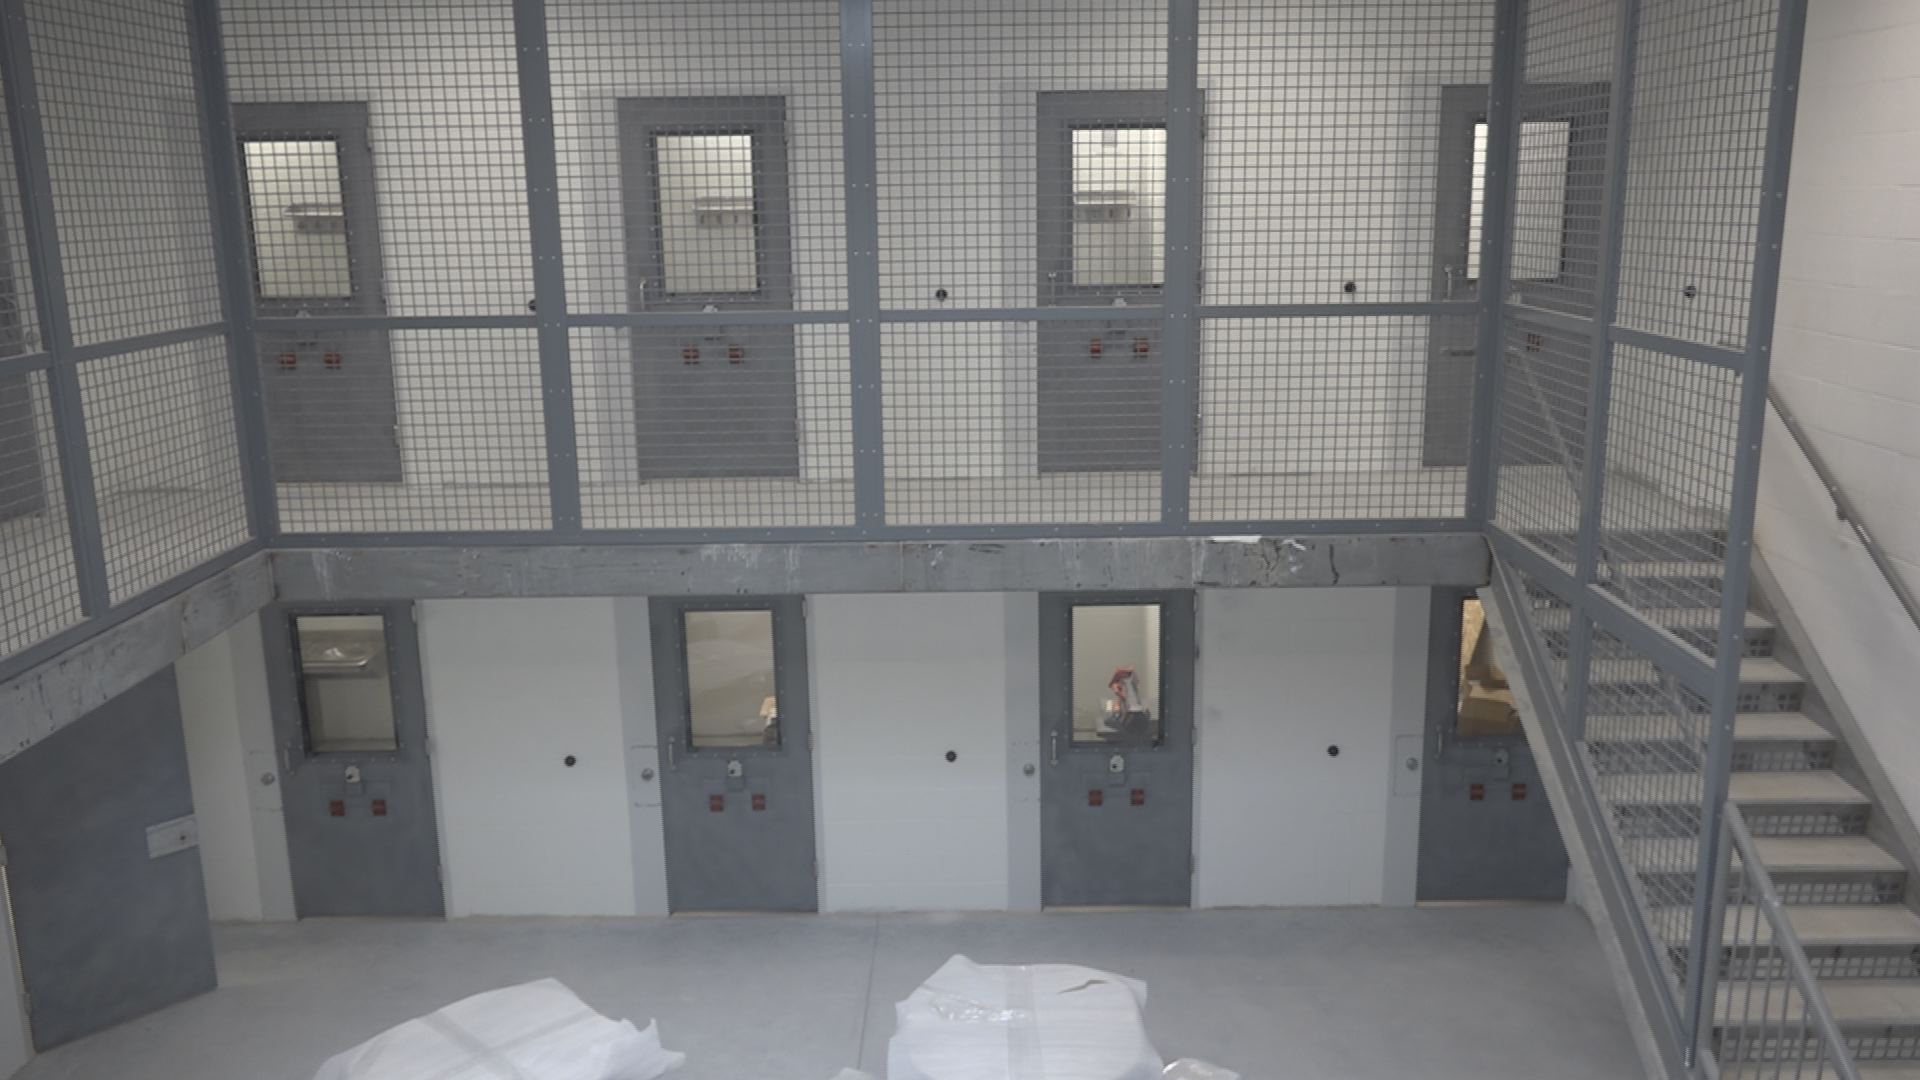 New Lee County Jail near complete, under budget and ahead of schedule